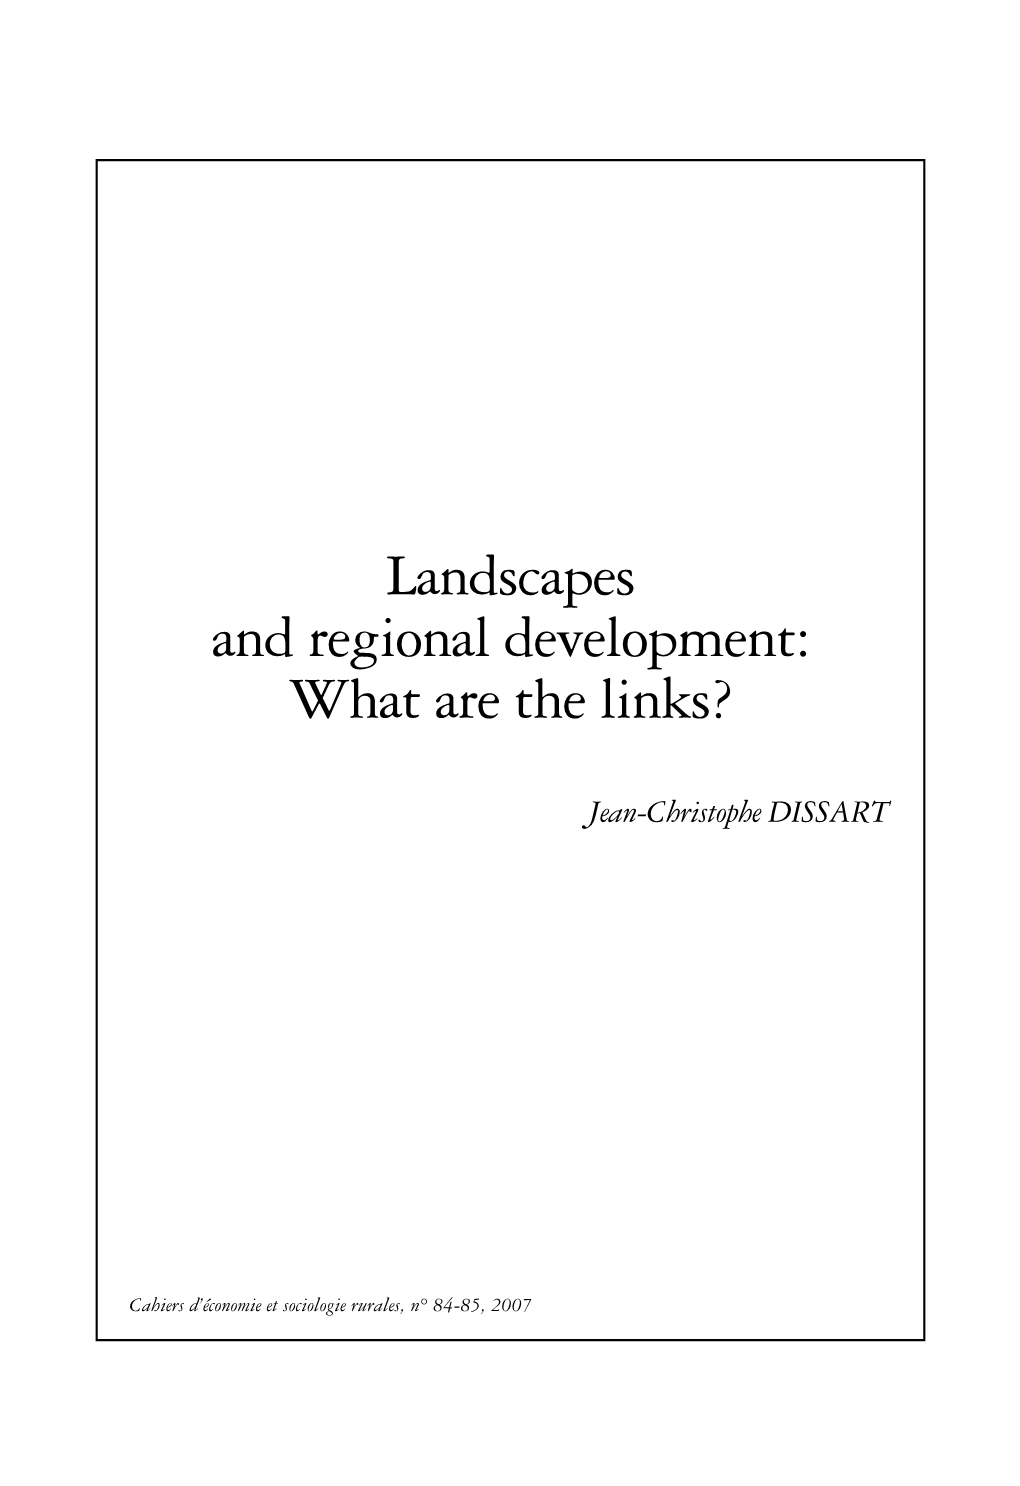 Landscapes and Regional Development: What Are the Links?